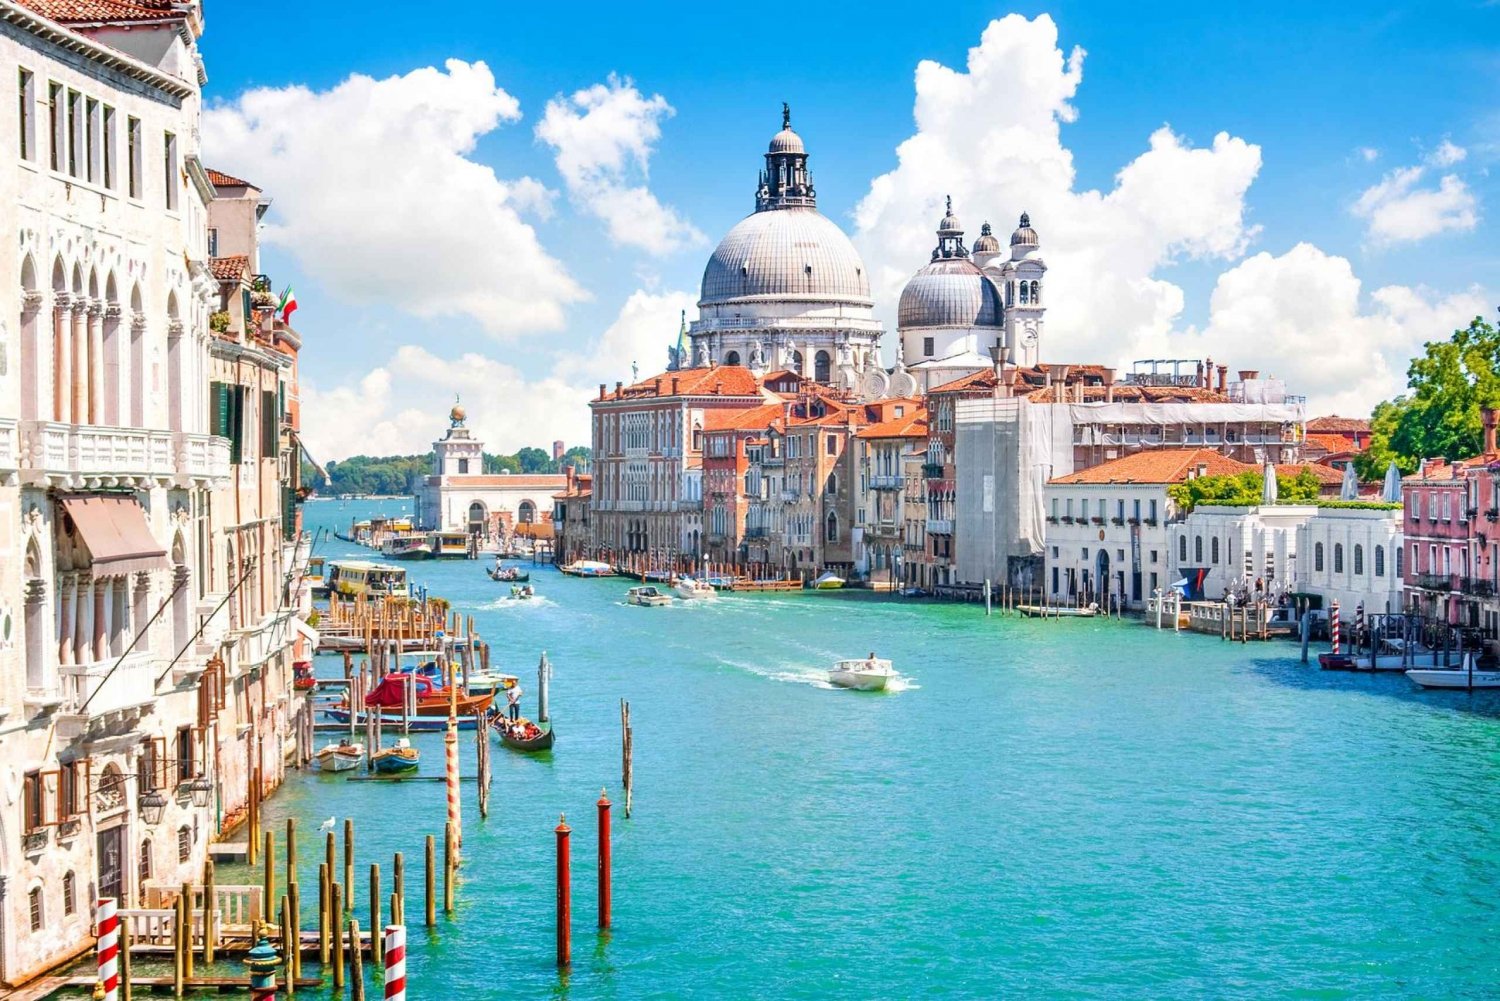 Venice: Guided Tour, St Mark's Basilica Ticket & Boat Tour